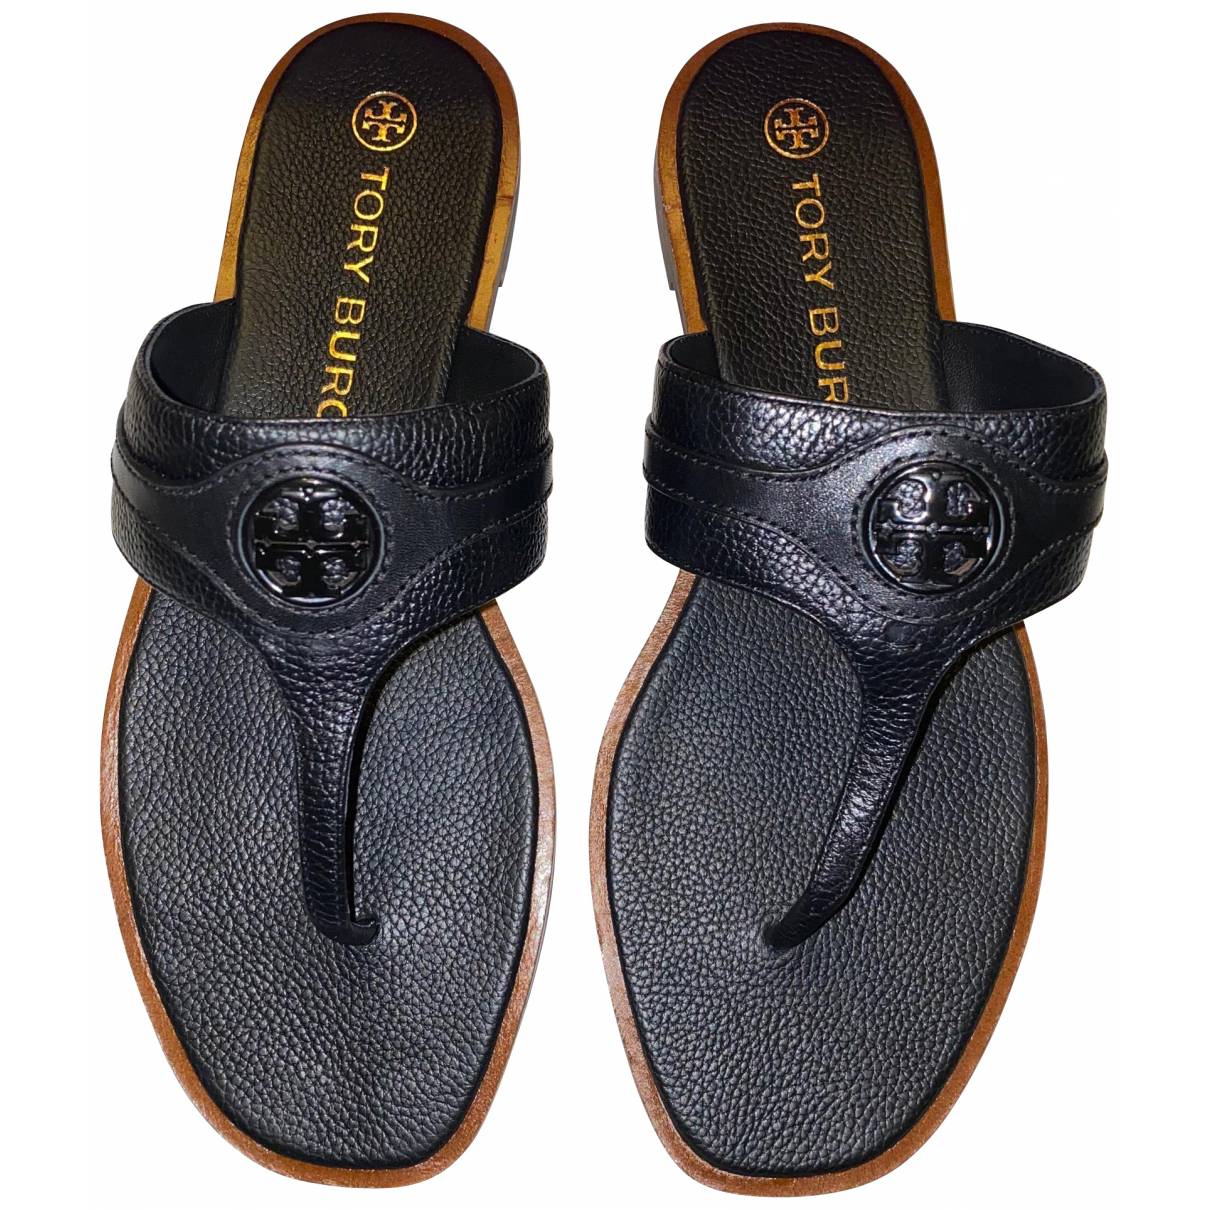 Sandals Tory Burch Black size 10 US in Not specified - 26828173